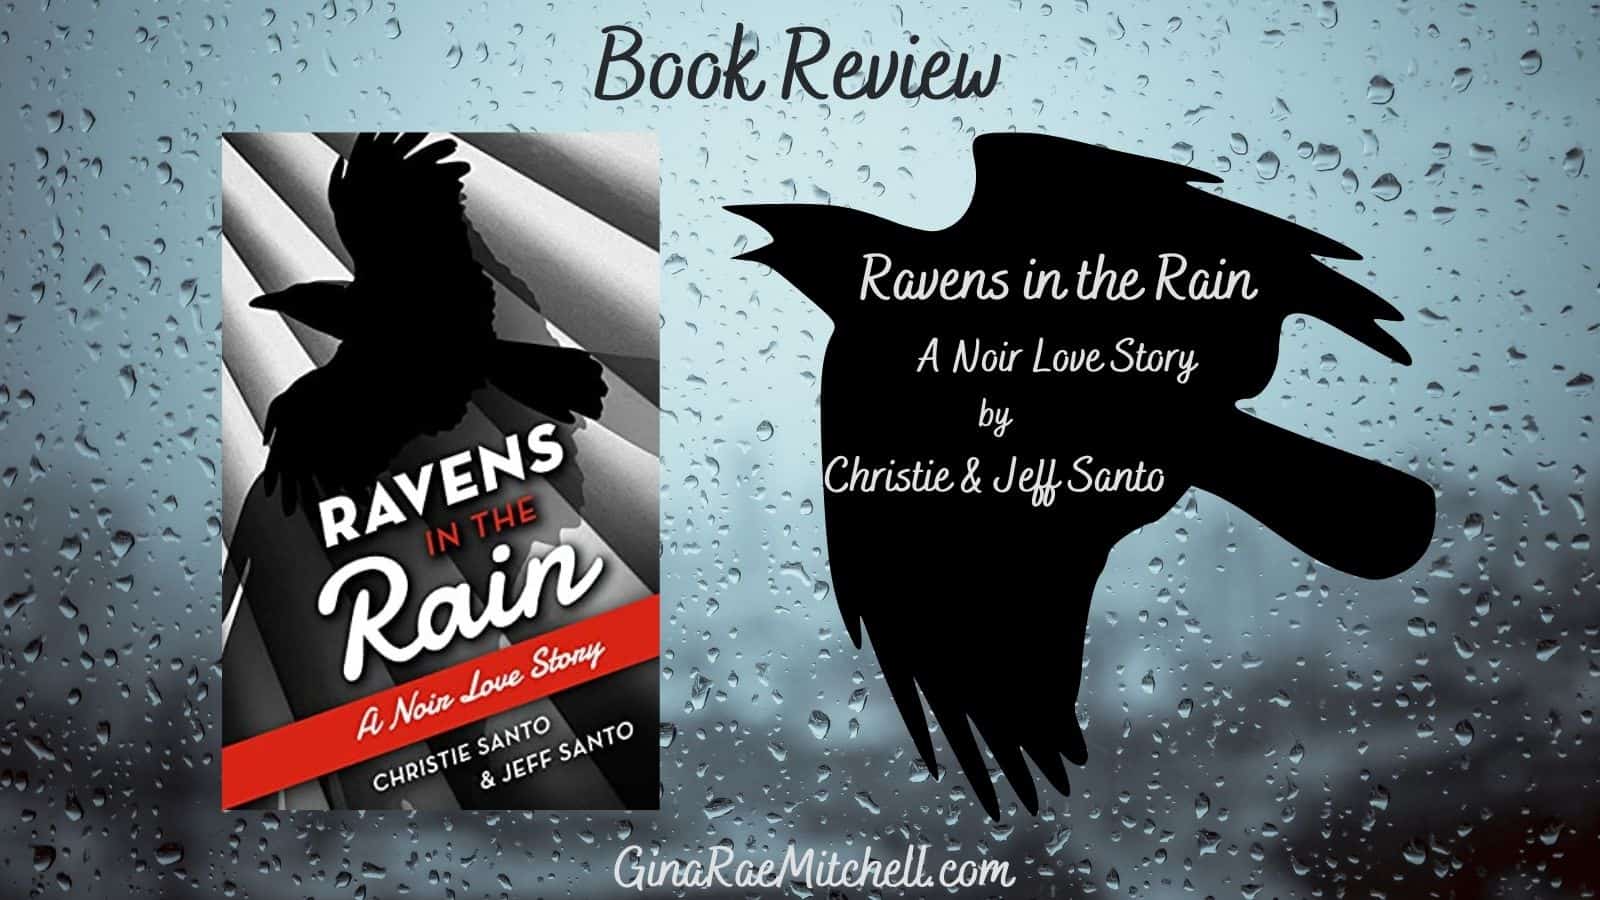 Ravens In The Rain: A Noir Love Story by Christie & Jeff Santo | 5-Star Review